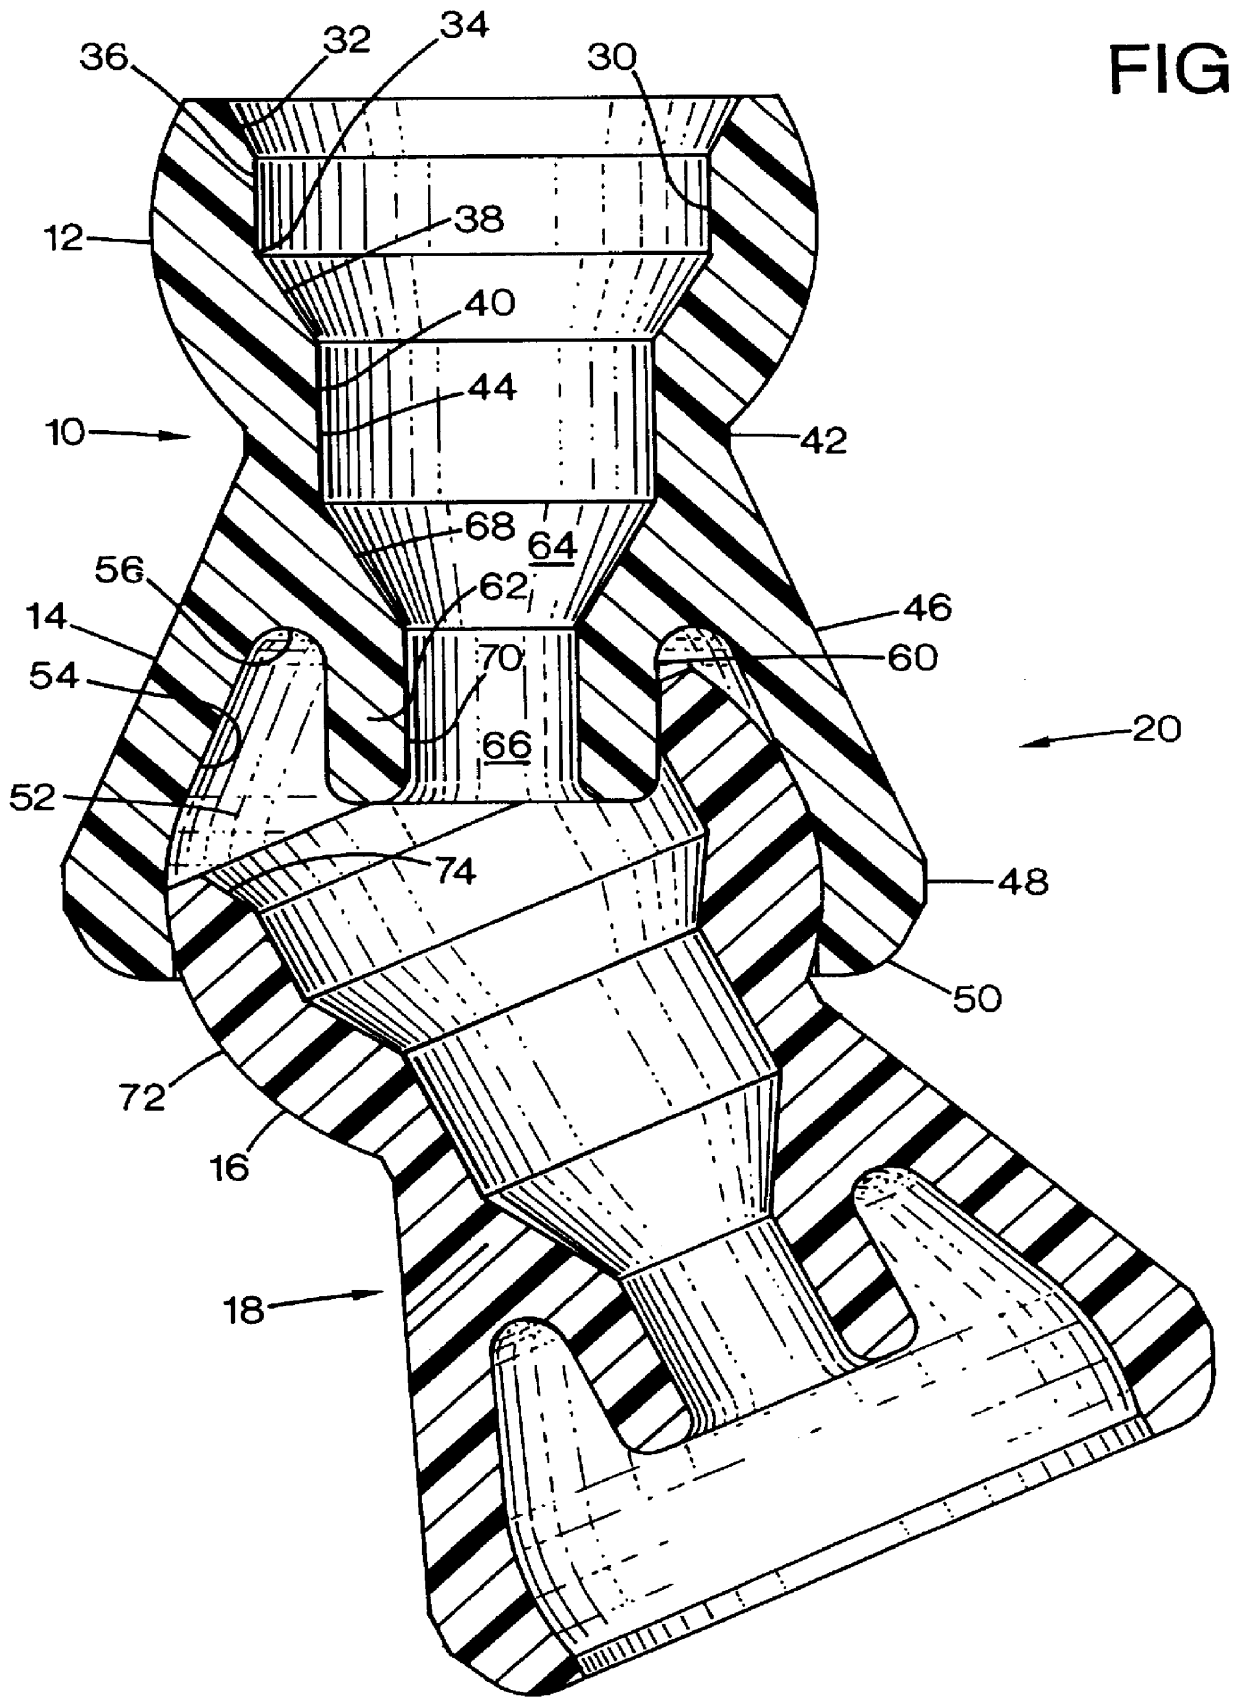 Ball and socket joint with internal stop